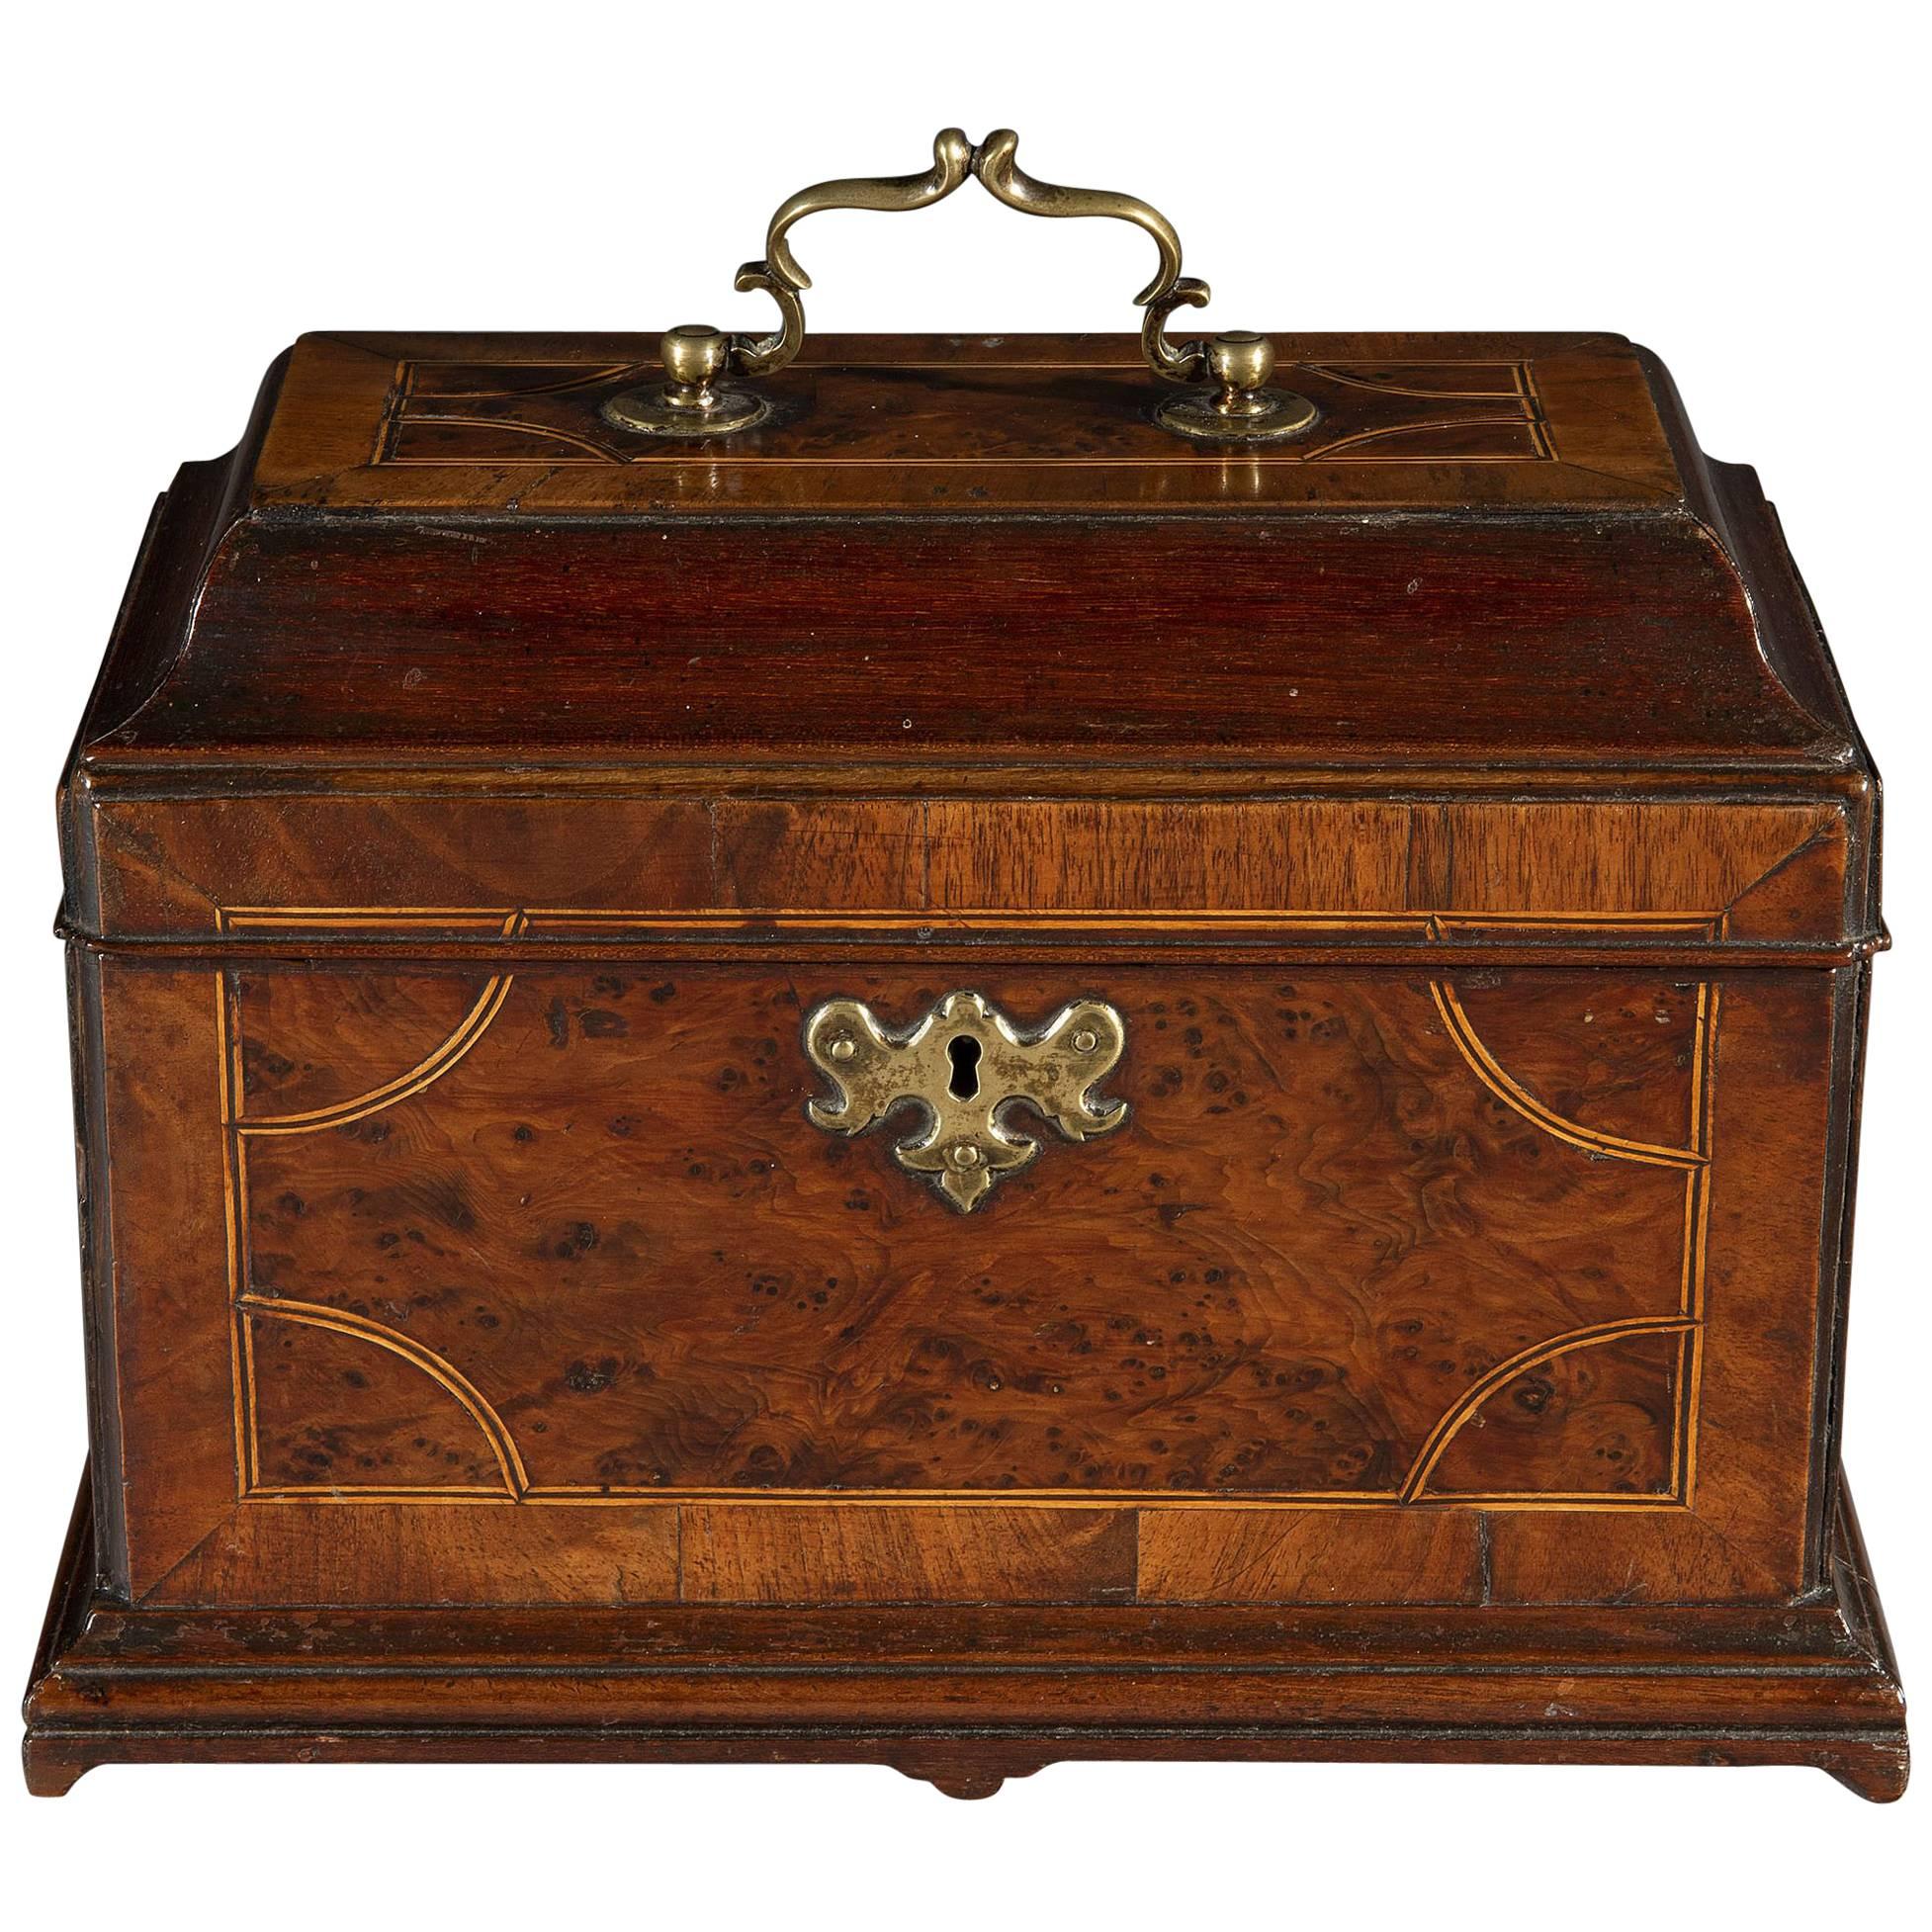 Early George II Period Early 18th Century Walnut Inlaid Tea Chest